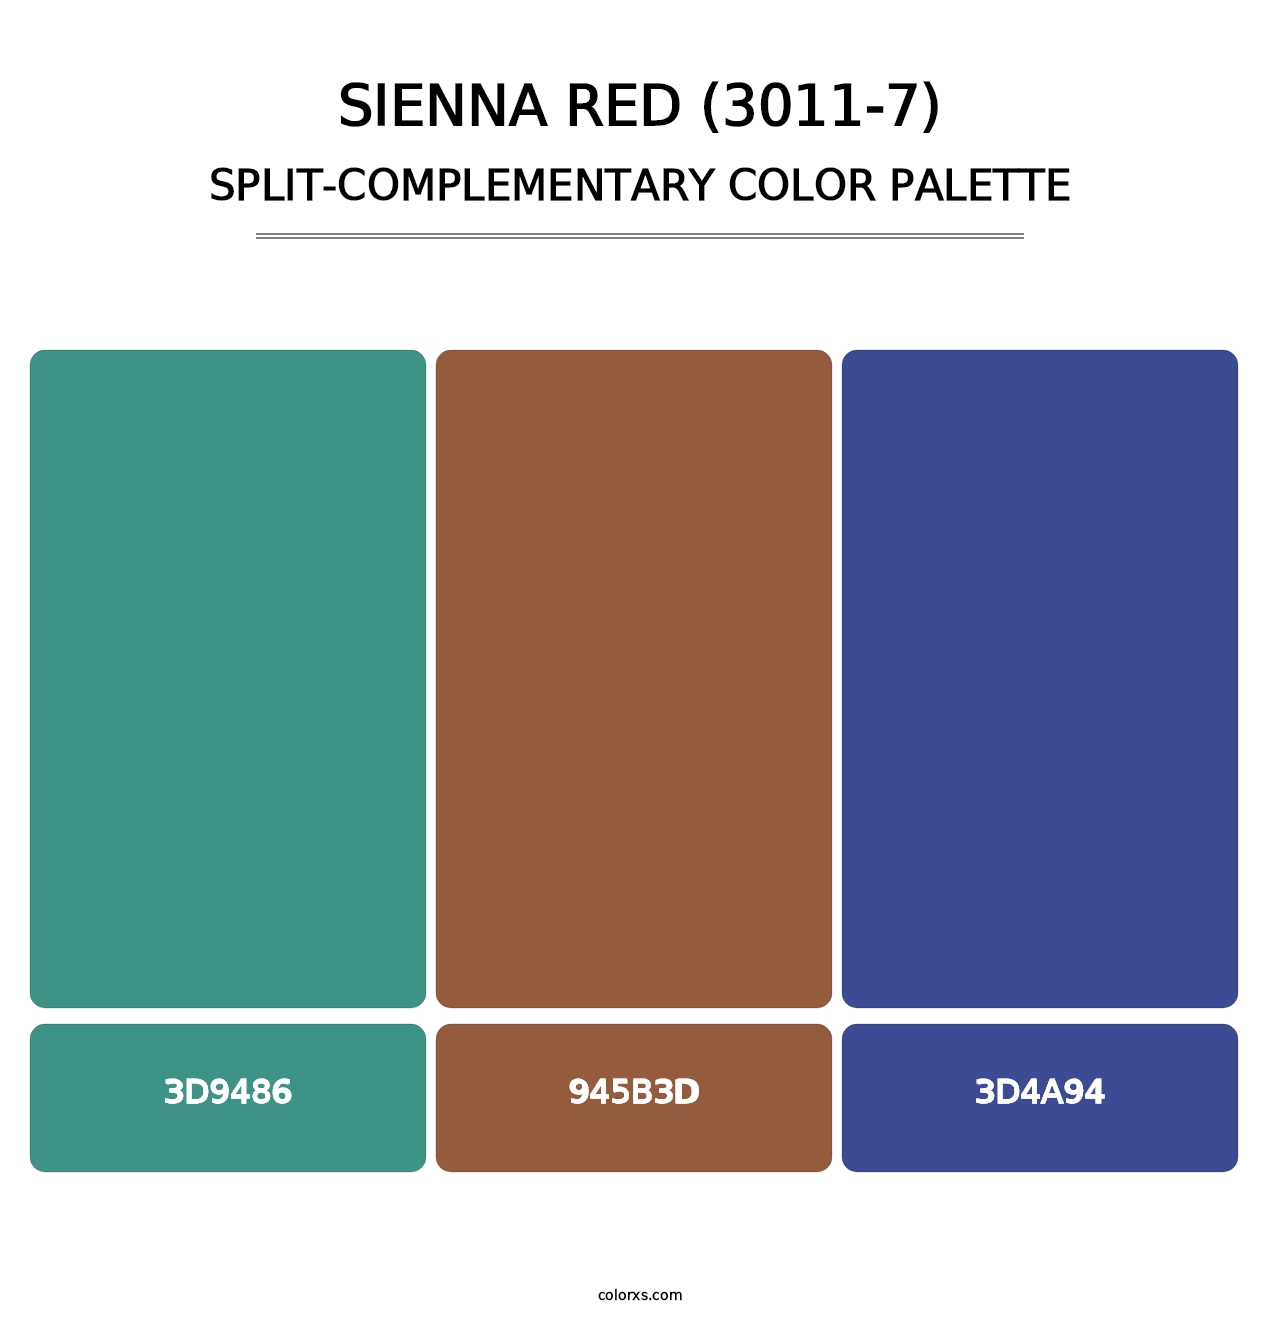 Sienna Red (3011-7) - Split-Complementary Color Palette